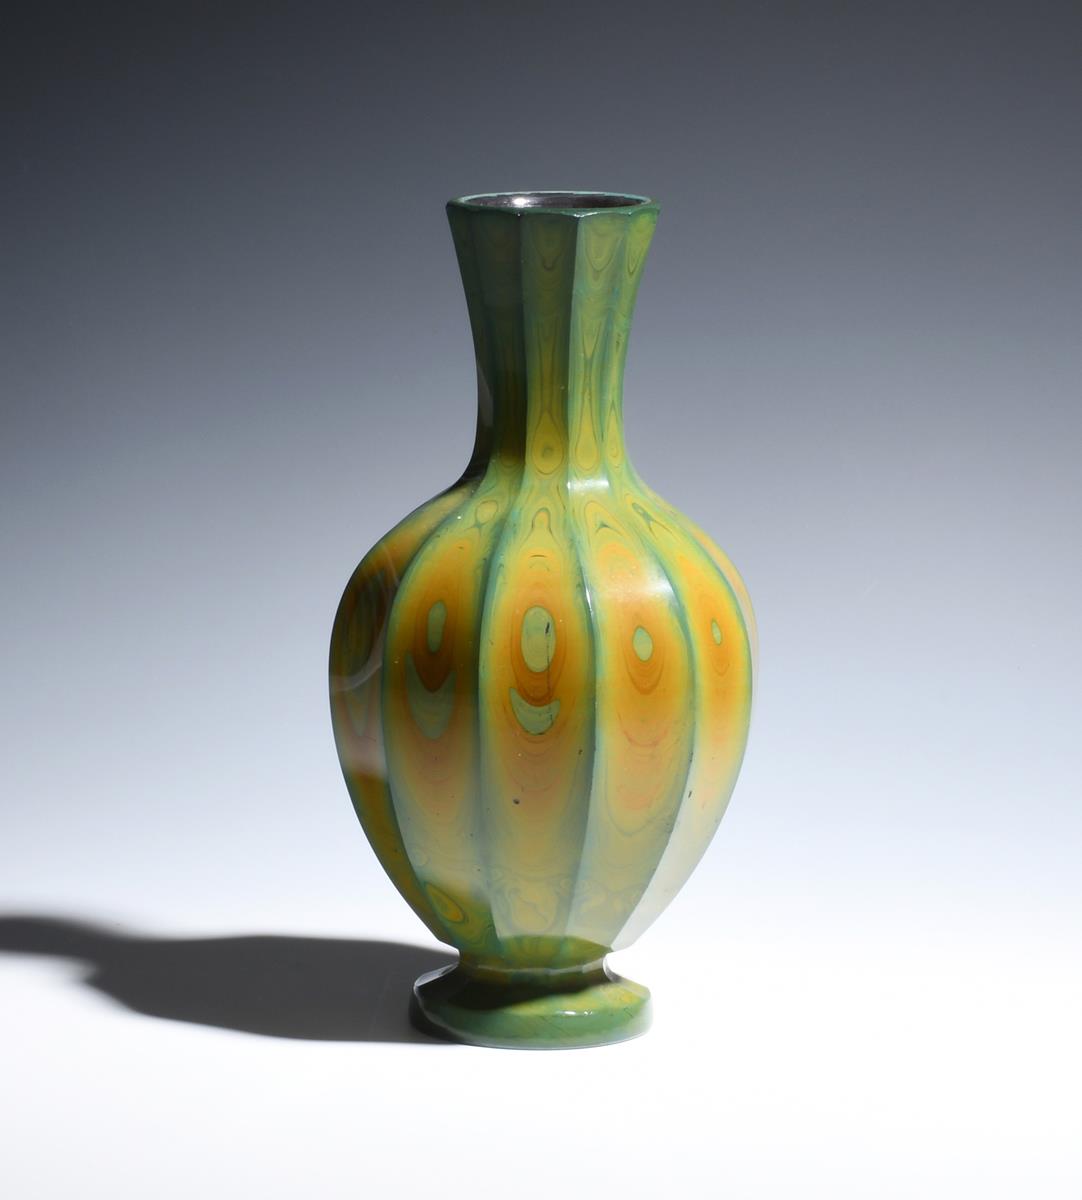 A Lithyalin glass vase c.1840, attributed to the workshop of Friedrich Egermann (Blottendorf), the